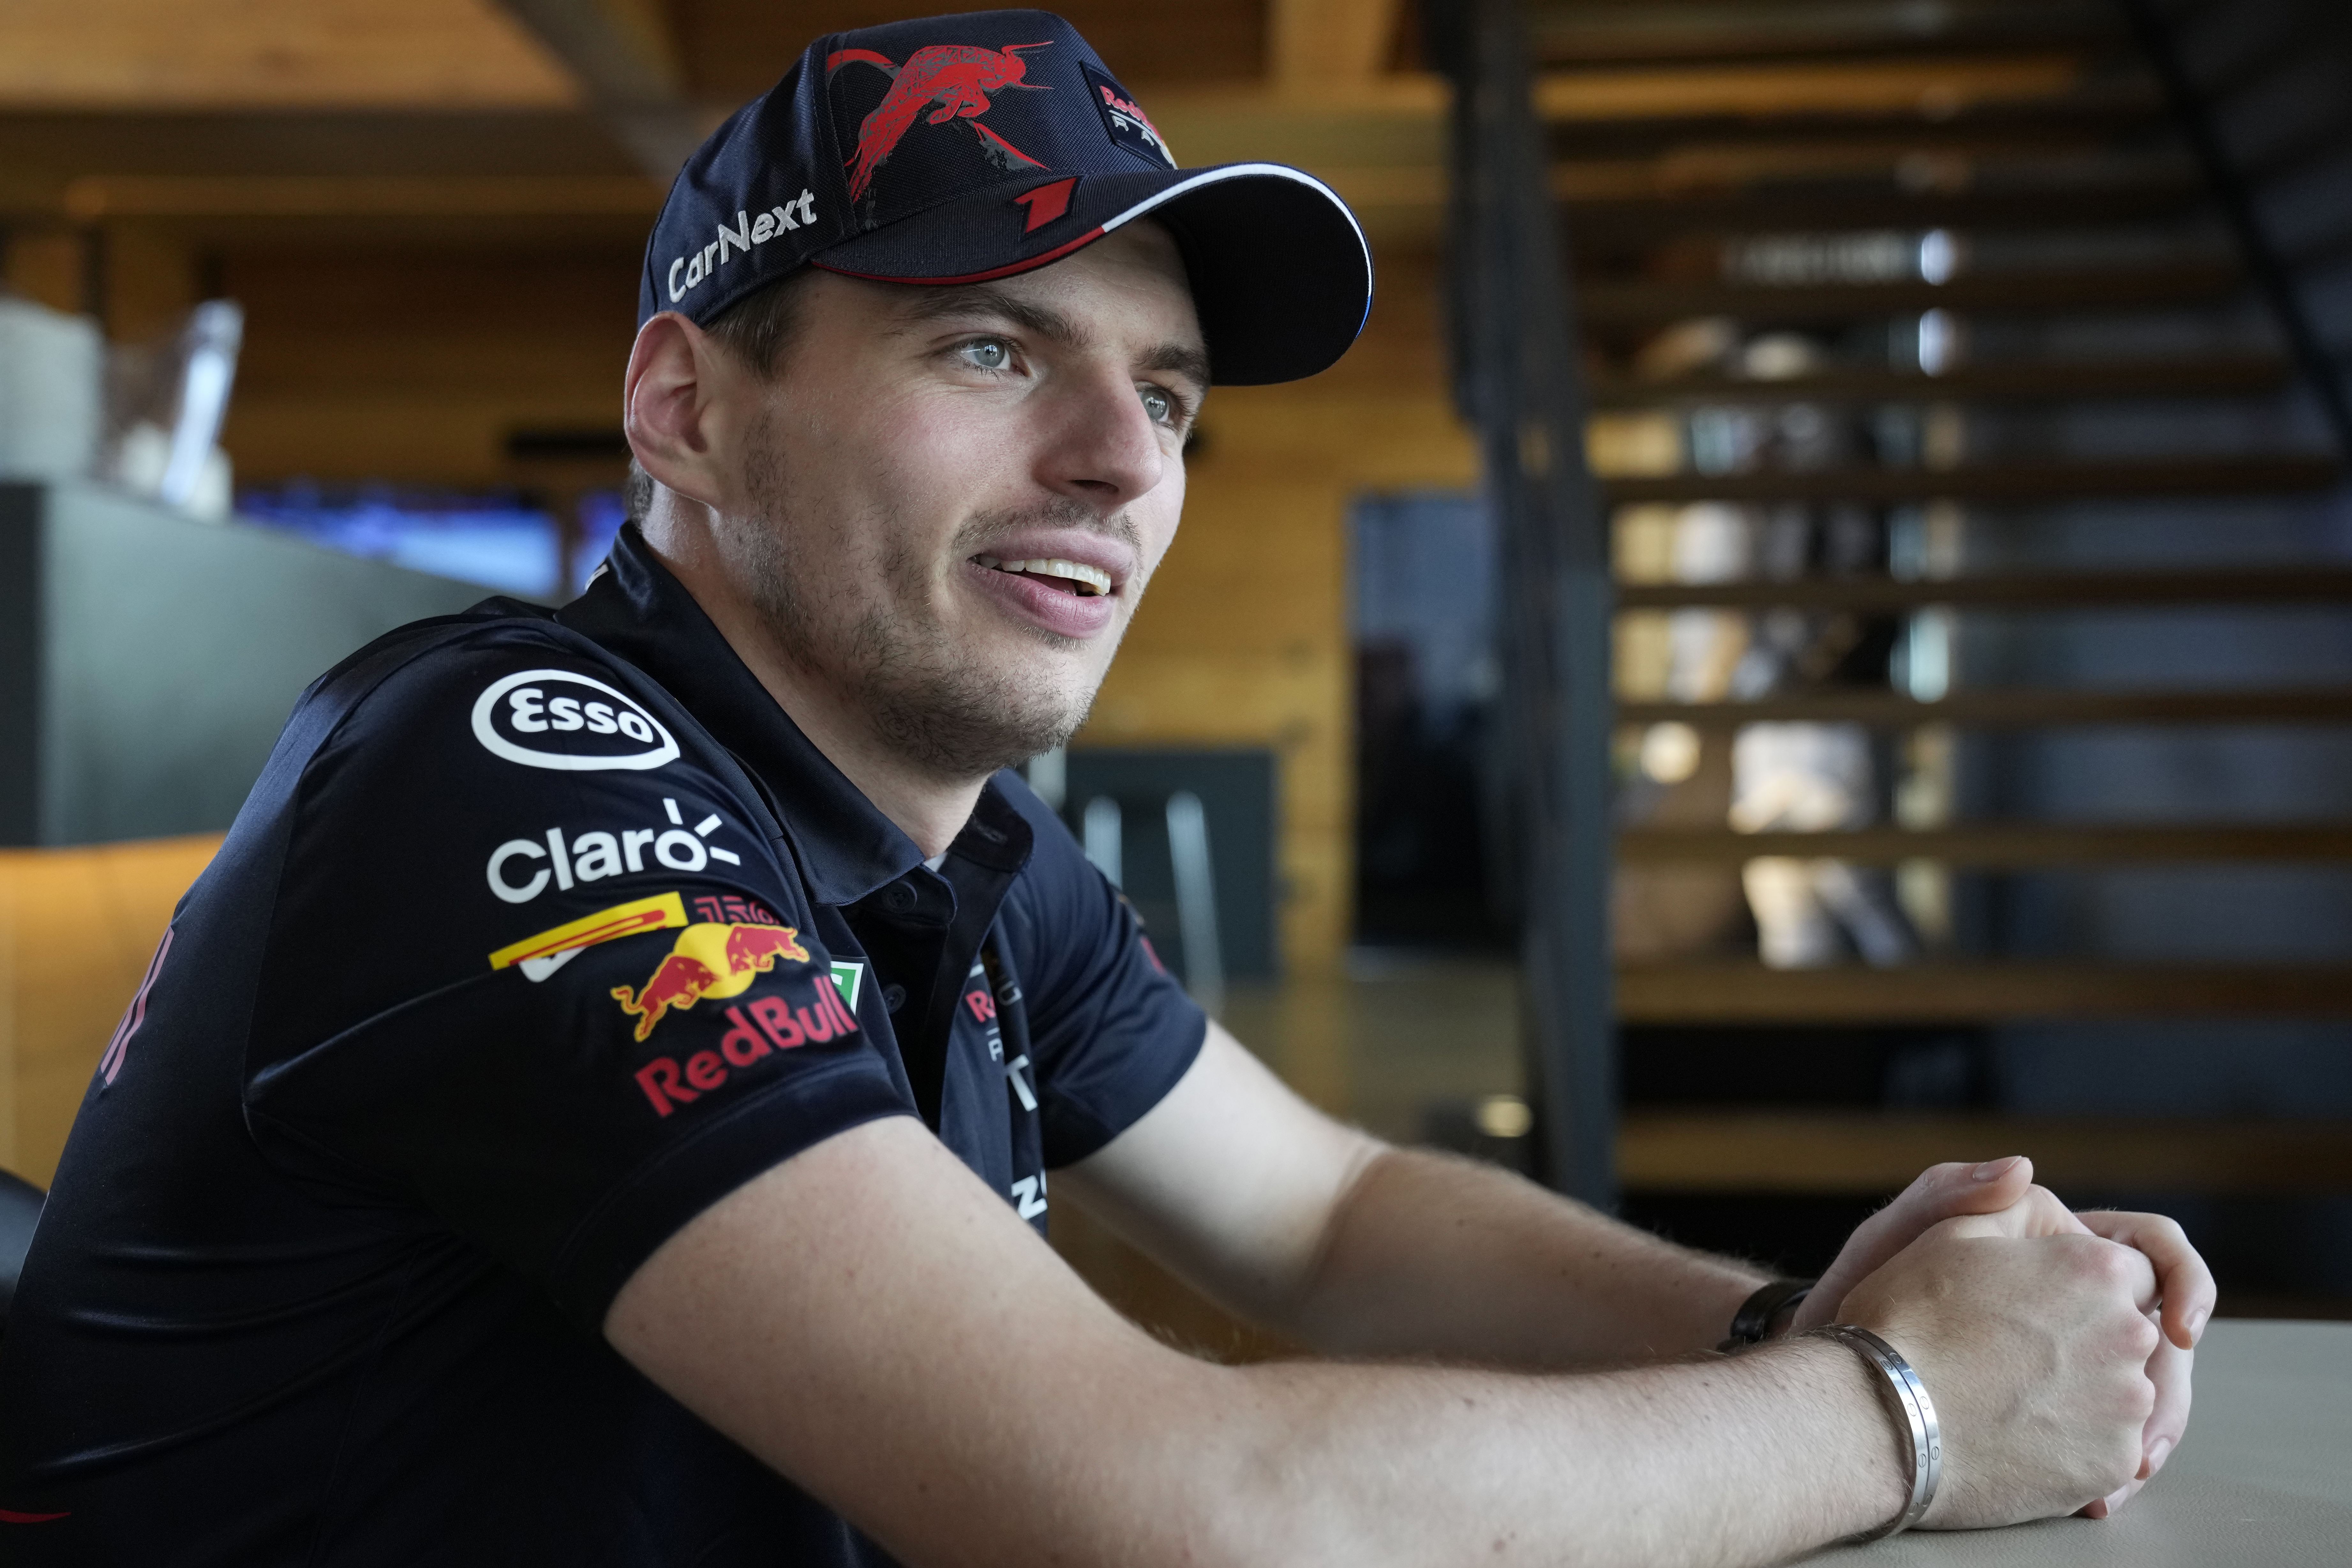 AP Exclusive: Verstappen says drivers limited in taming fans